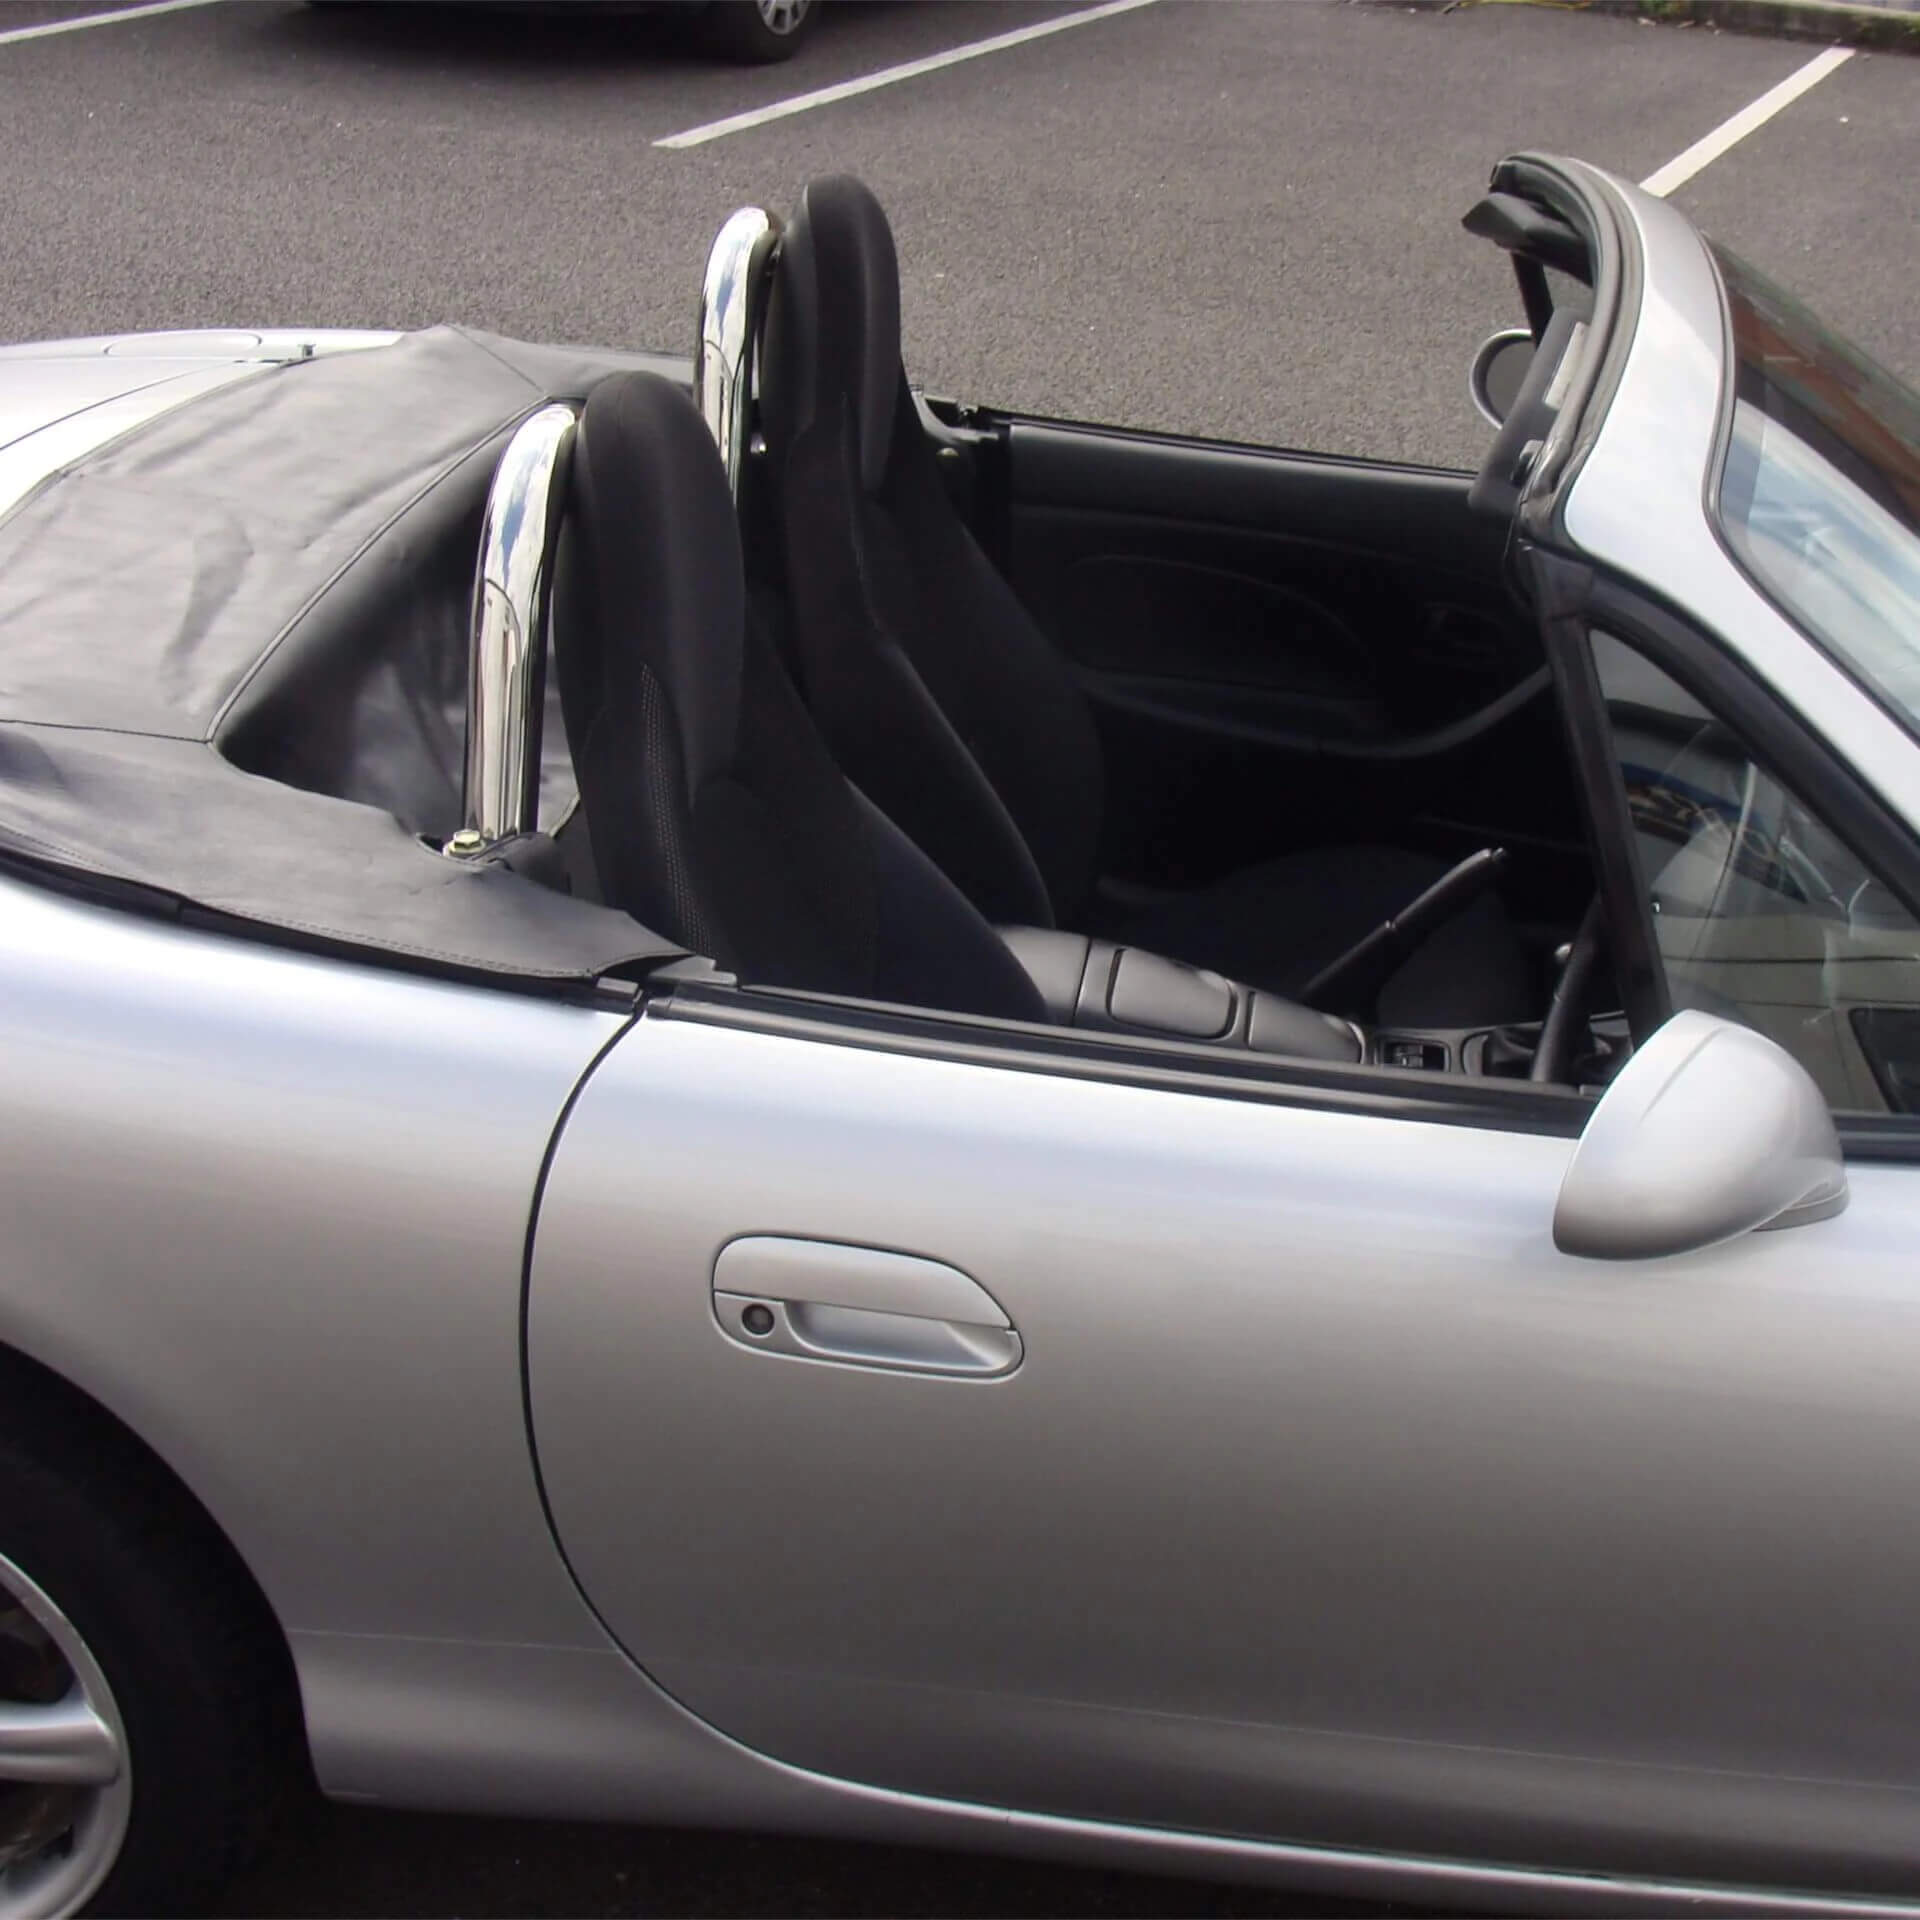 Direct4x4 accessories for Mazda MX-5 vehicles with a photo of a silver Mazda MX-5 fitted with our stainless steel roll bar